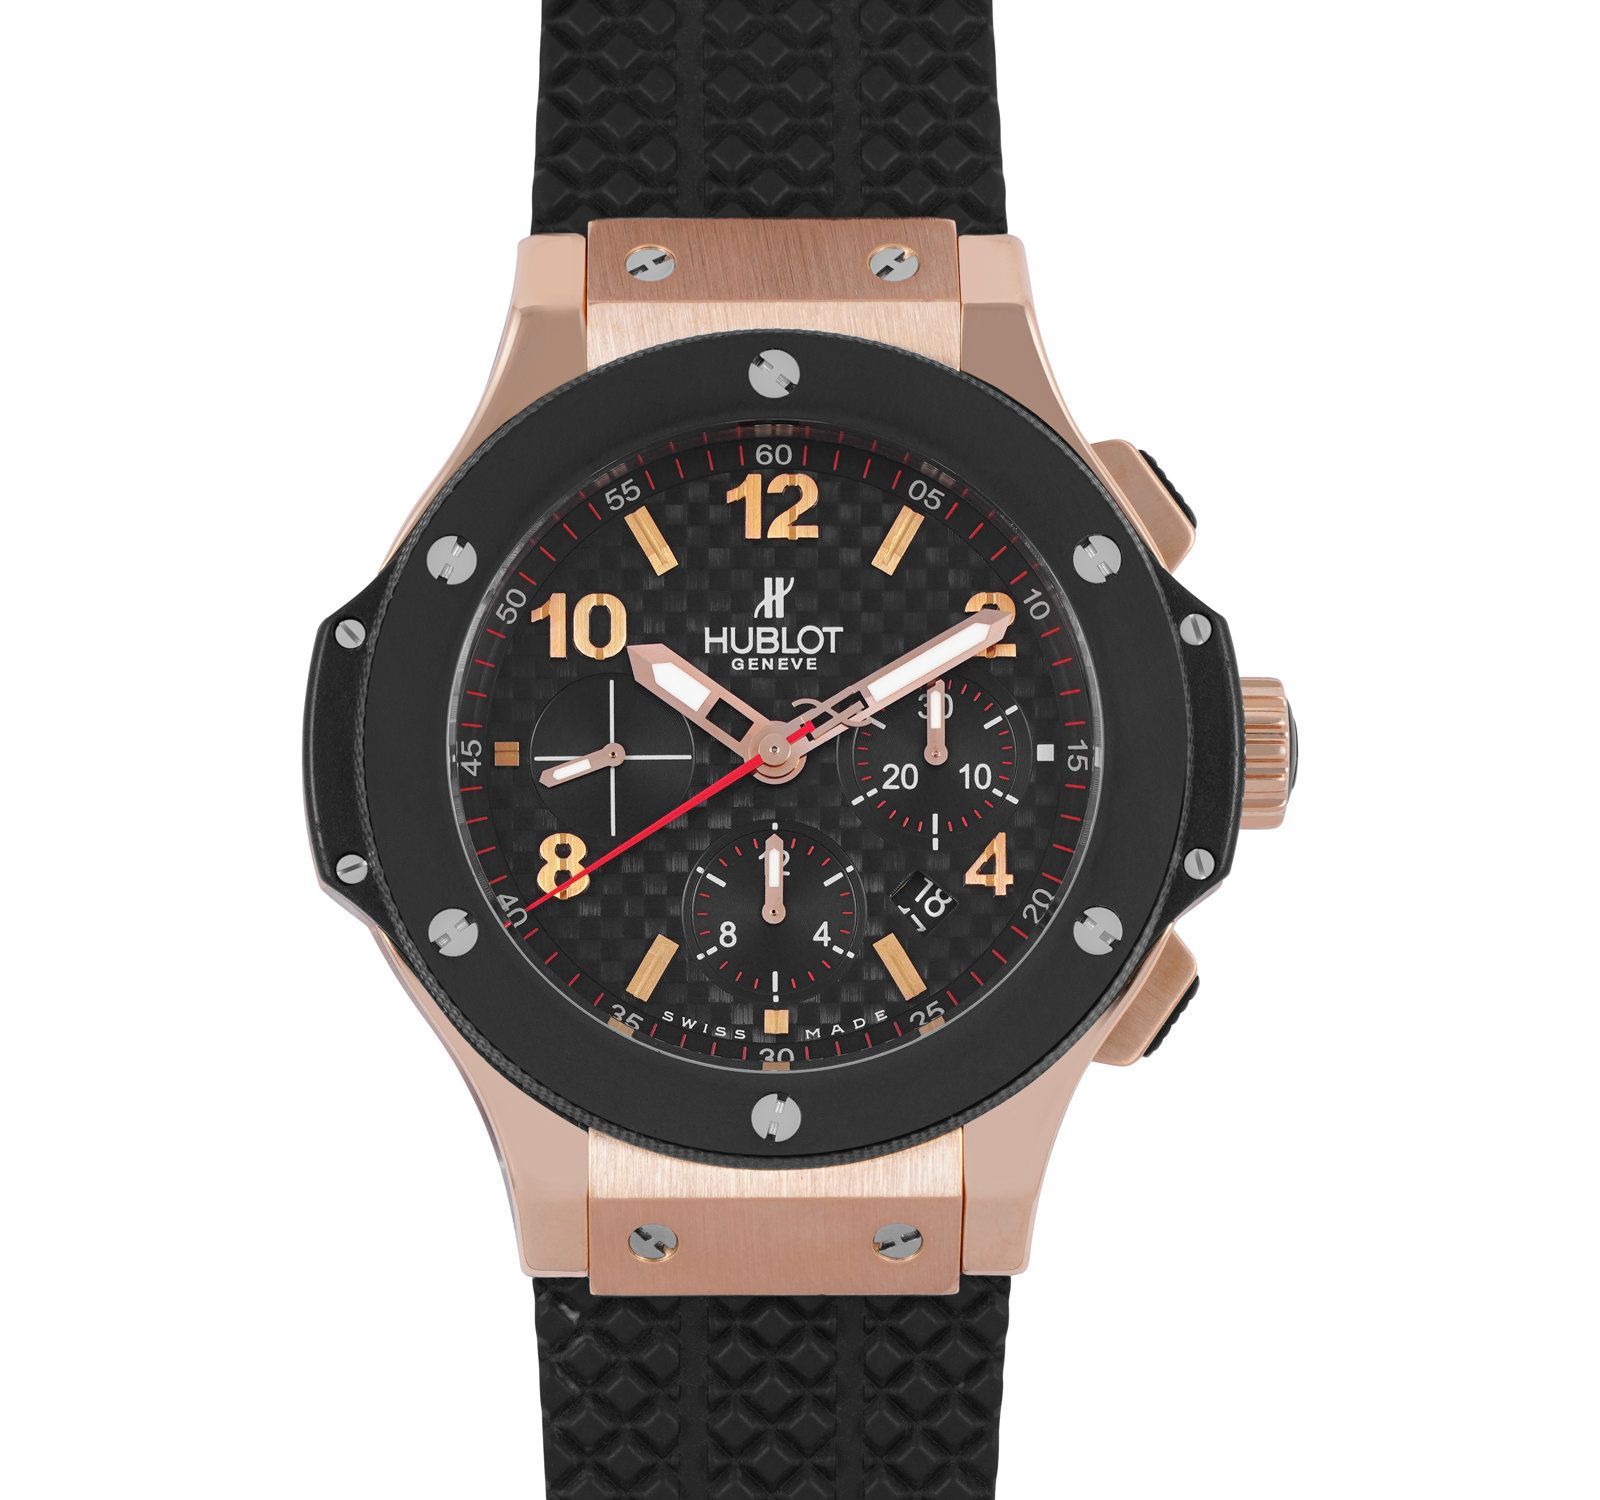 Used Hublot geneve Big bang 582666 watch ($1,300) for sale - Timepeaks